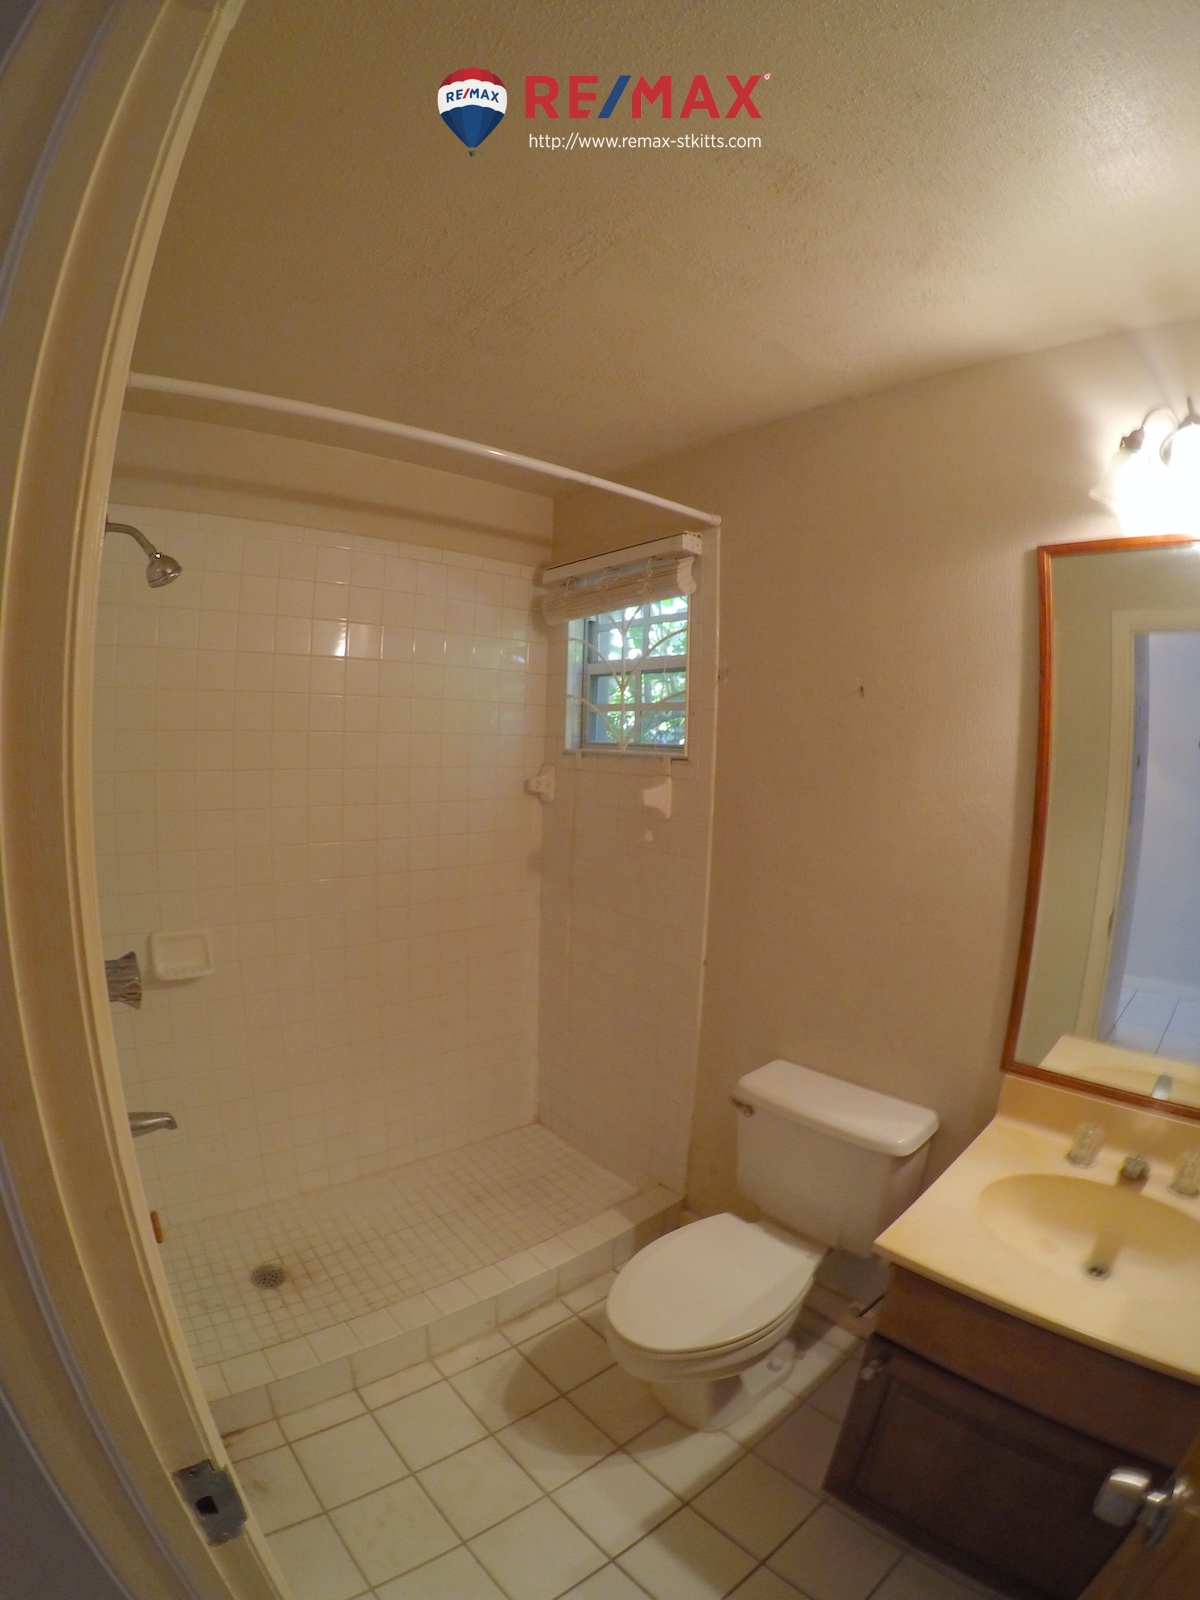 Downstairs bathroom of Two floor, two bedroom apartment for sale, St. Kitts